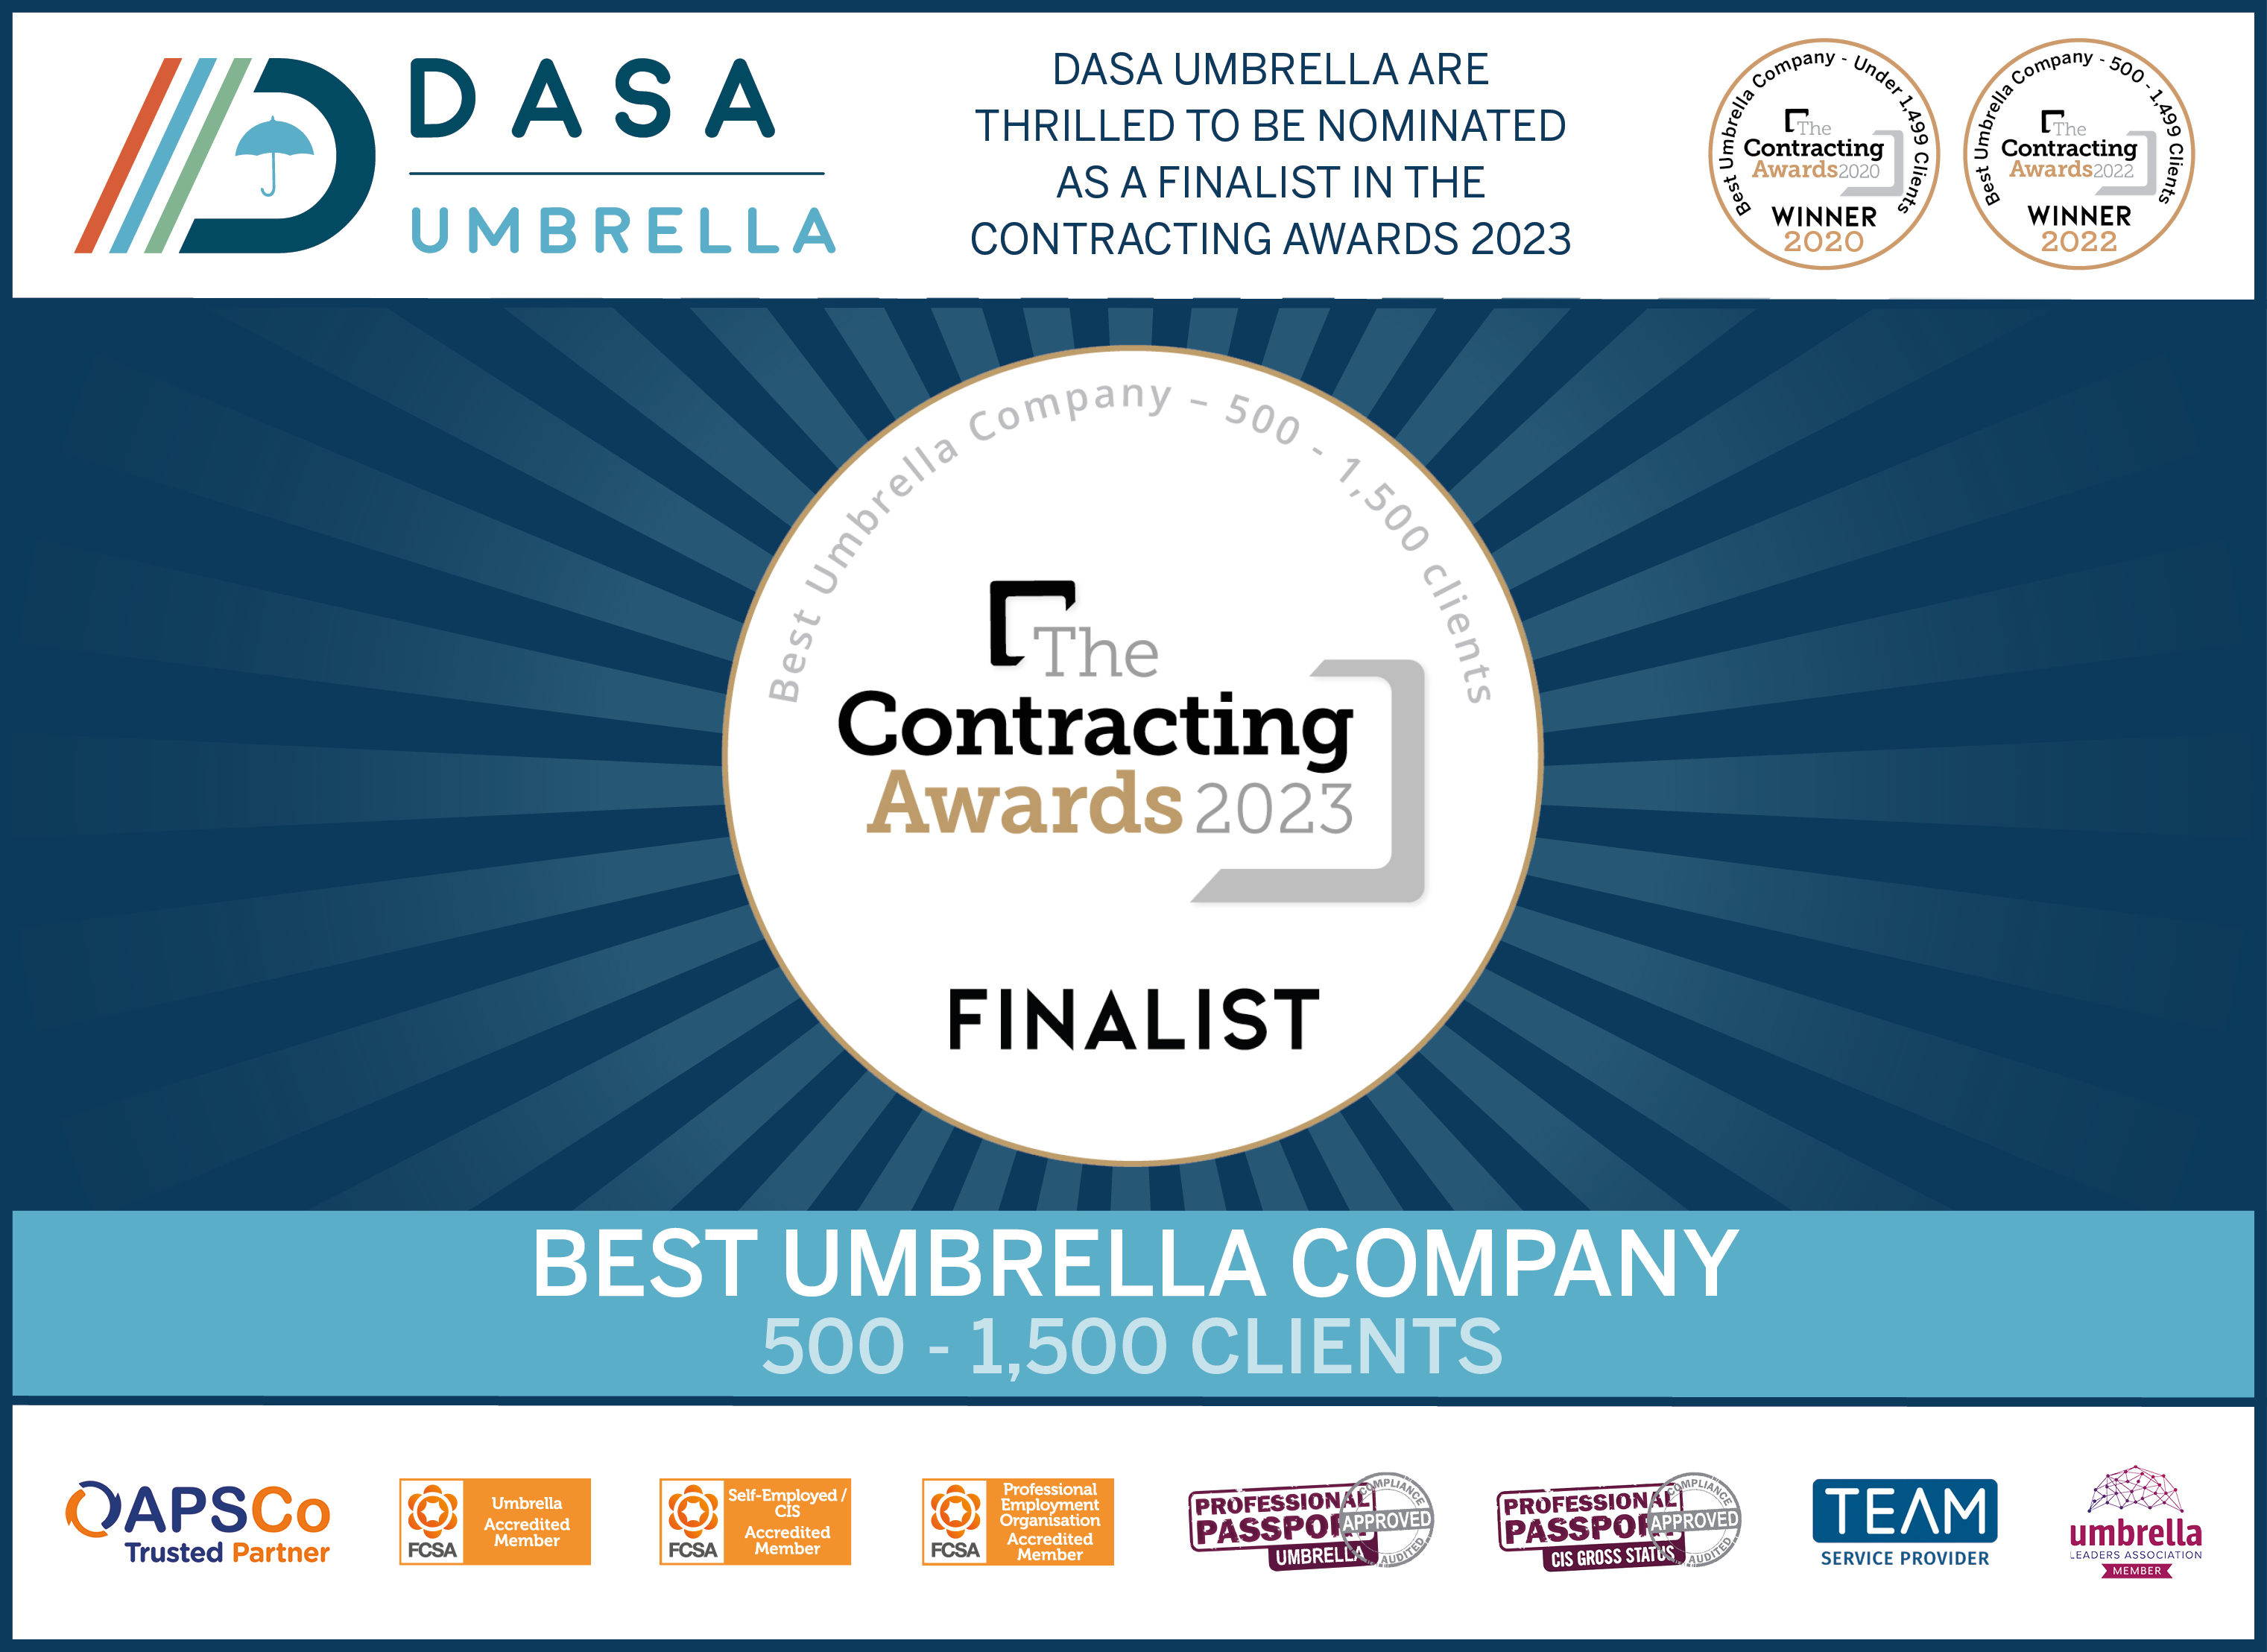 FINALIST AT THE CONTRACTING AWARDS 2023